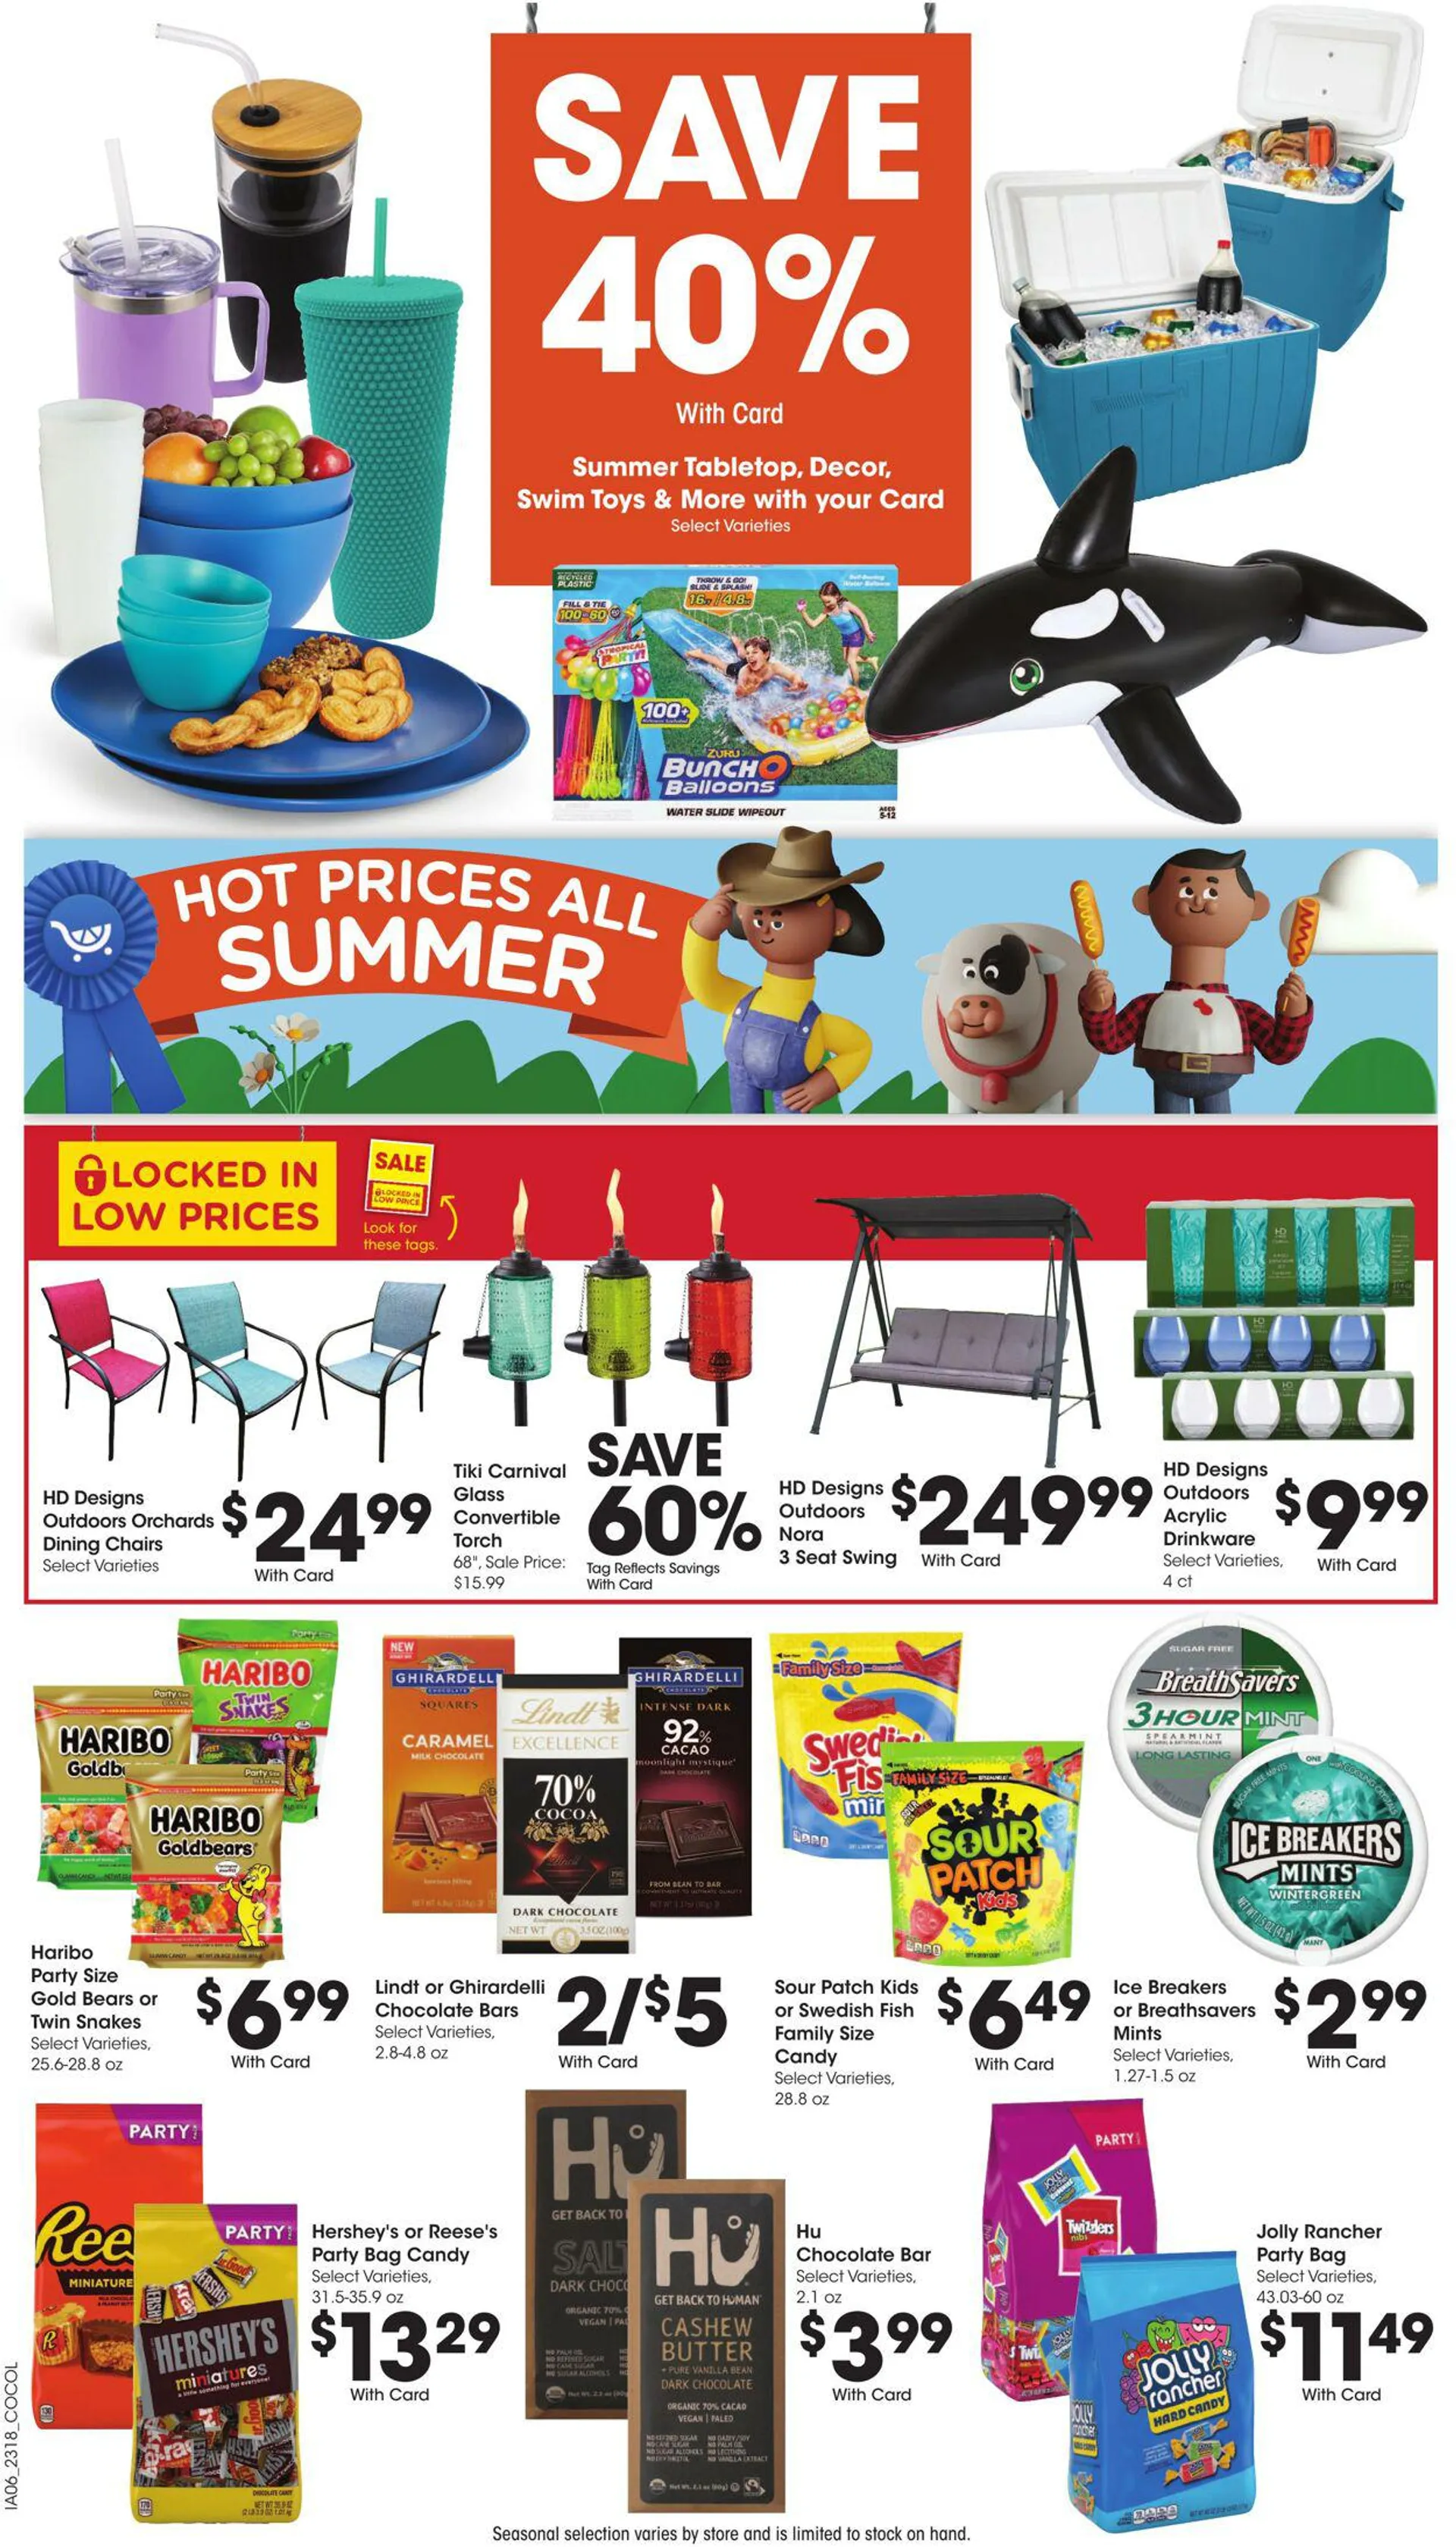 Kroger Current weekly ad - 14